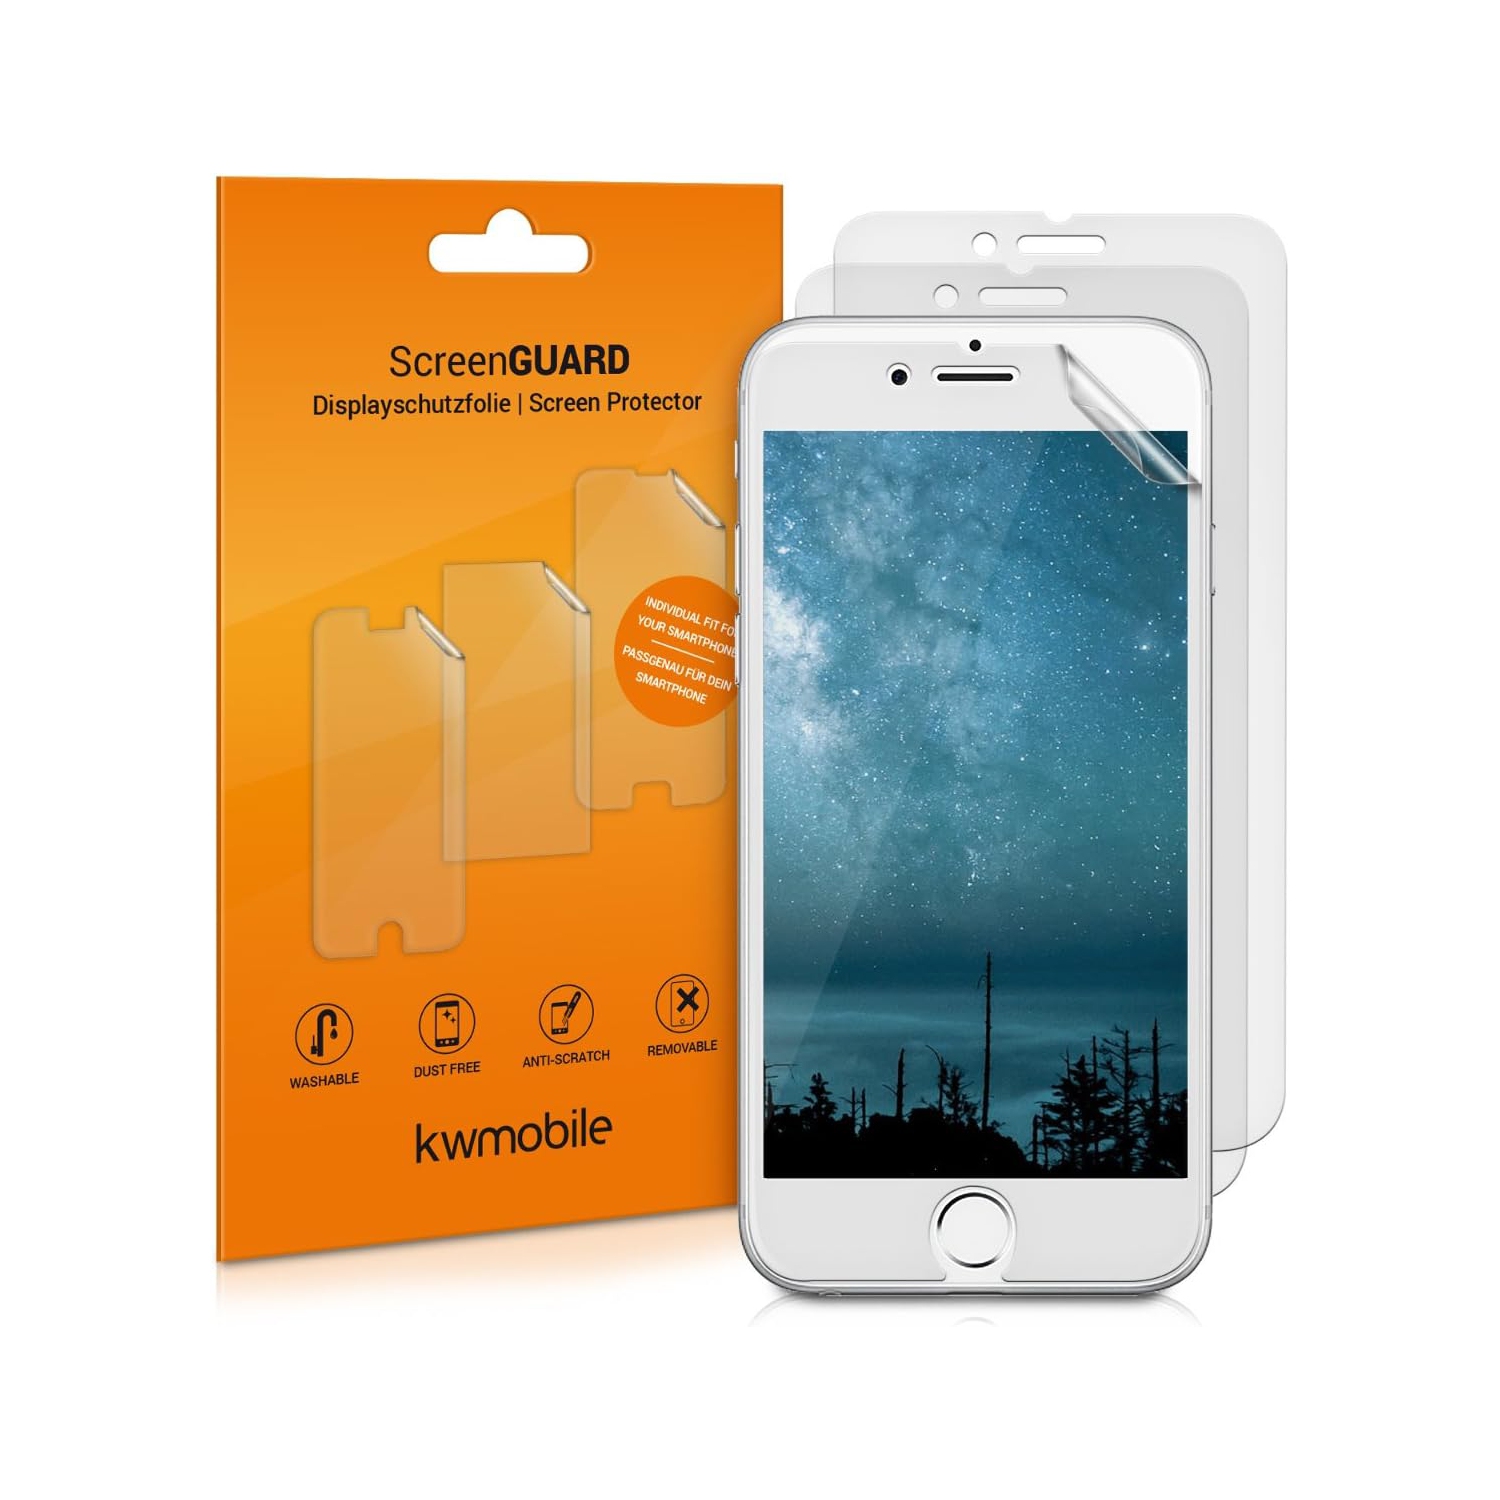 Set of 3 Screen Protectors Compatible with Apple iPhone 6 / 6S / 7/8 - Matte Anti-Glare Display Films